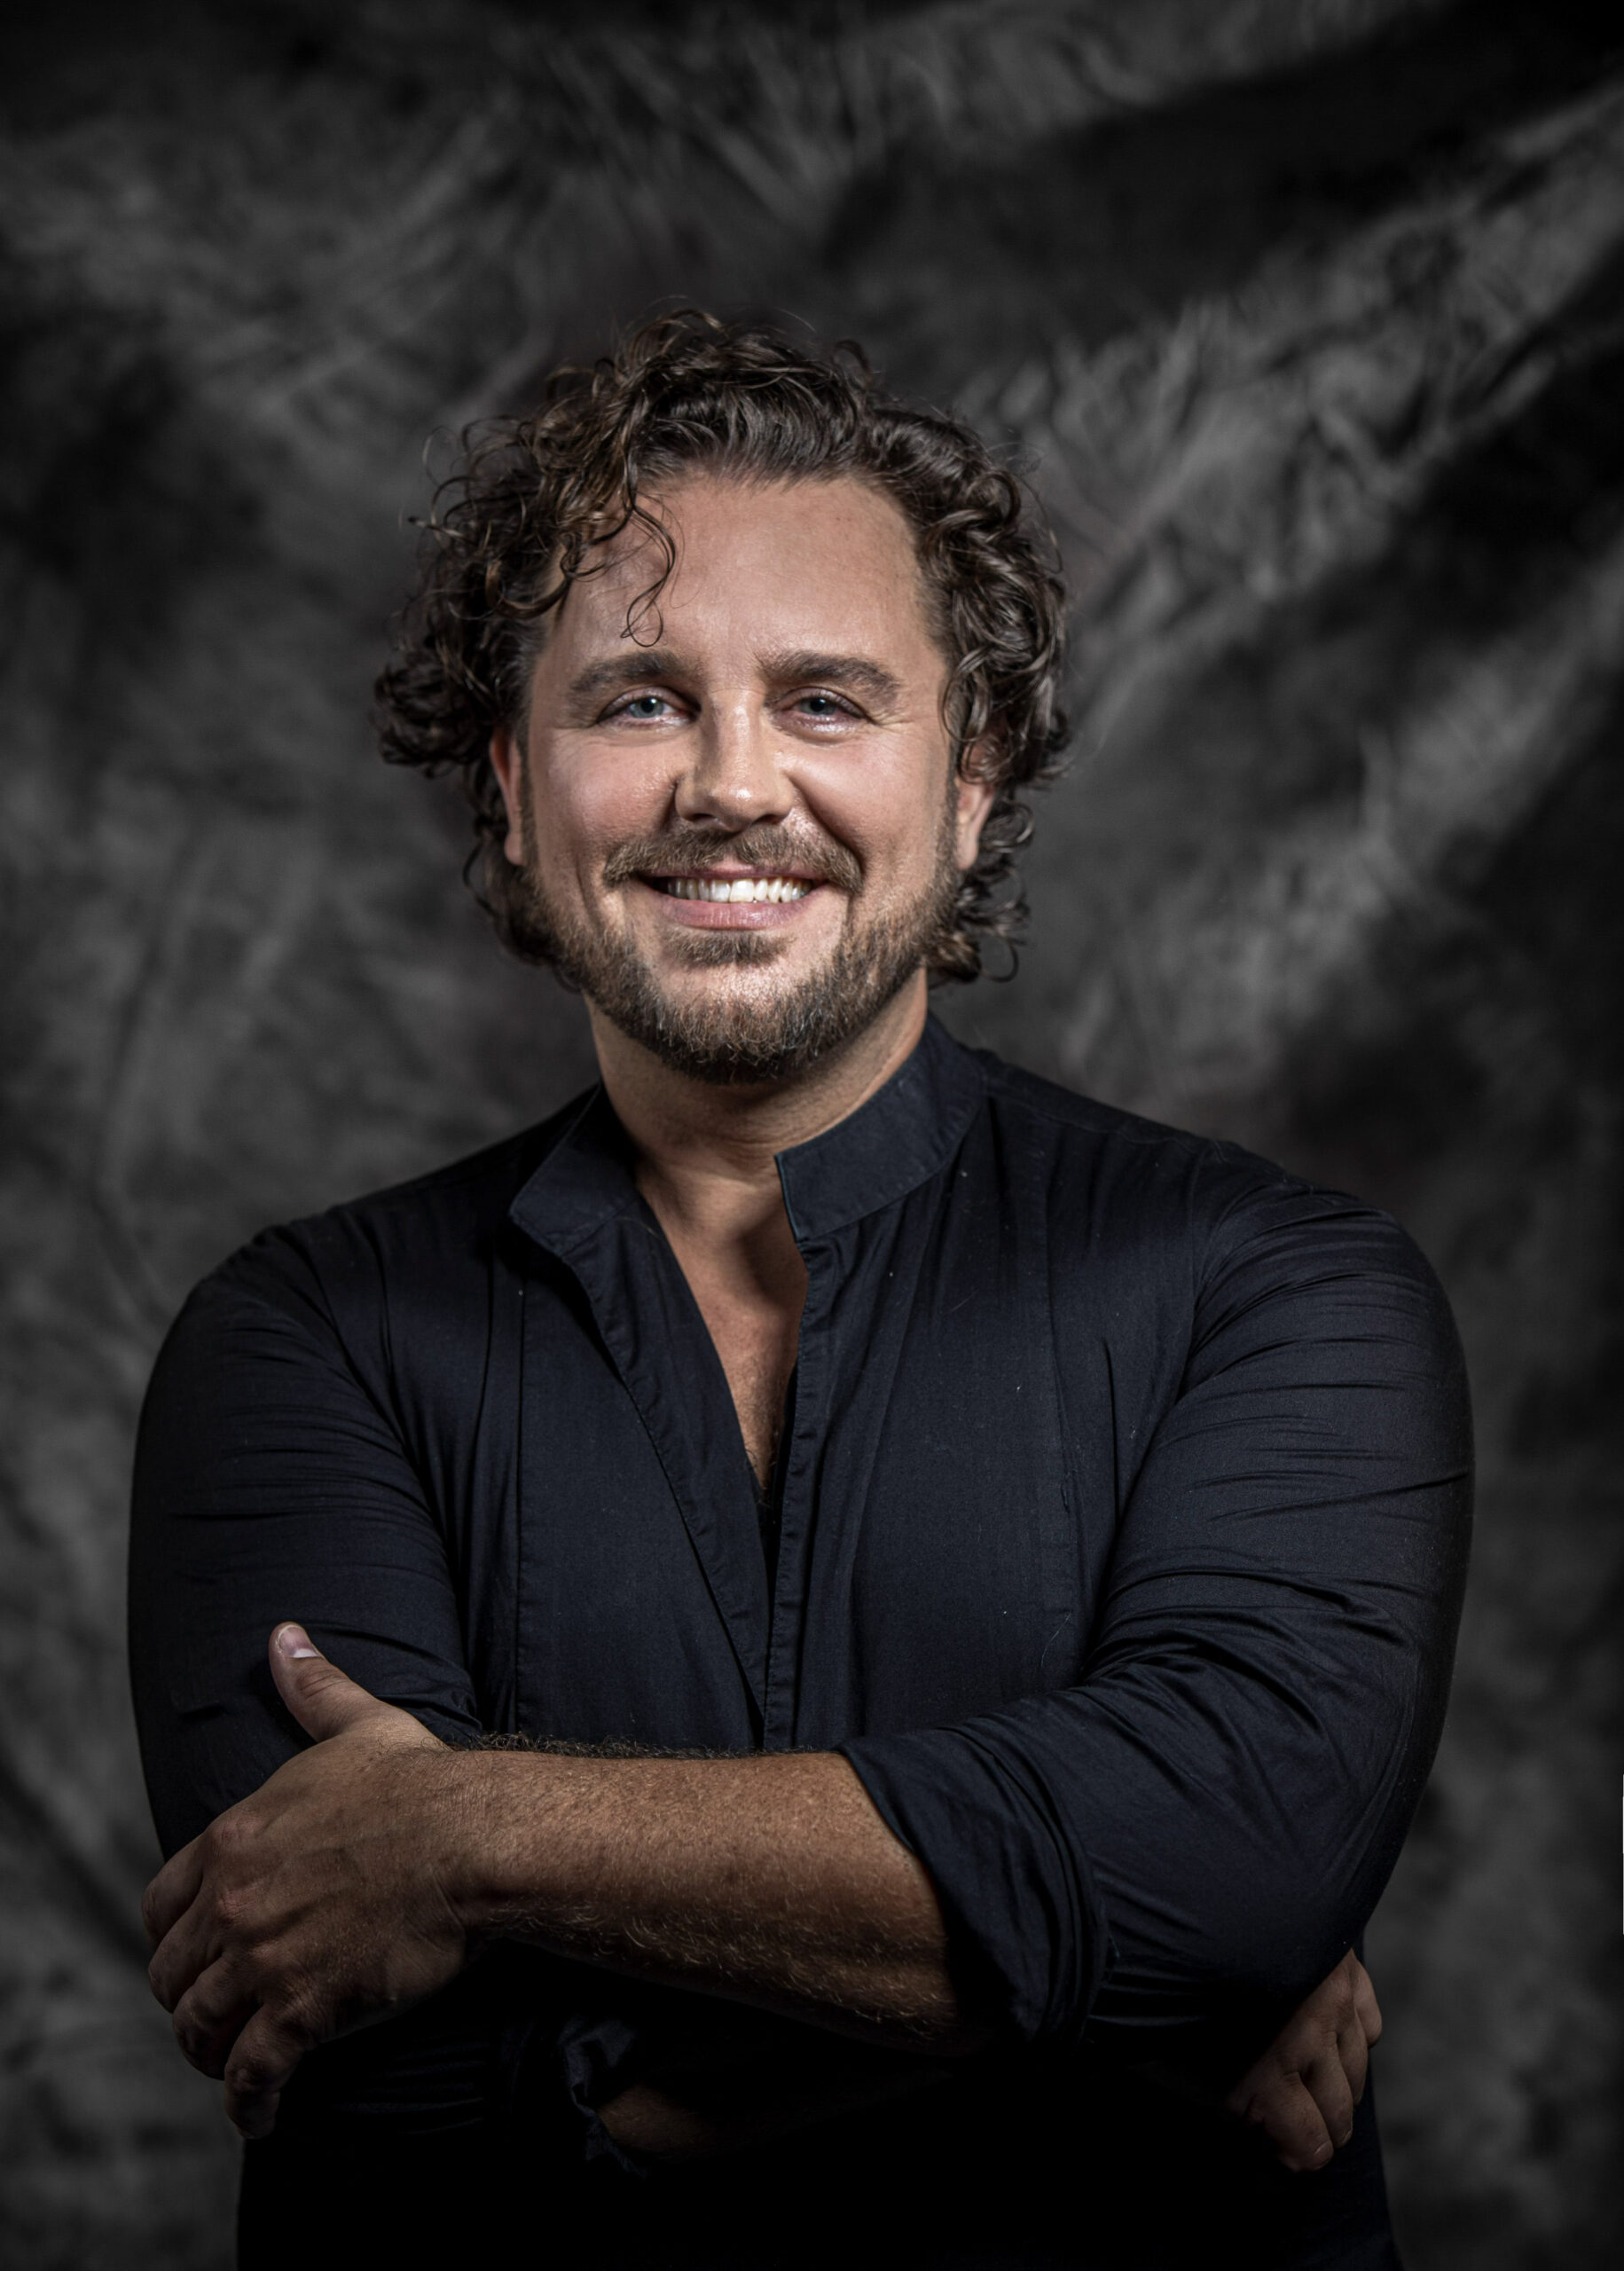 Baritenor Michael Spyres will join Bel Canto Boot Camp at Guild Hall for the 2022 launch season. © MARCO BORRELLI